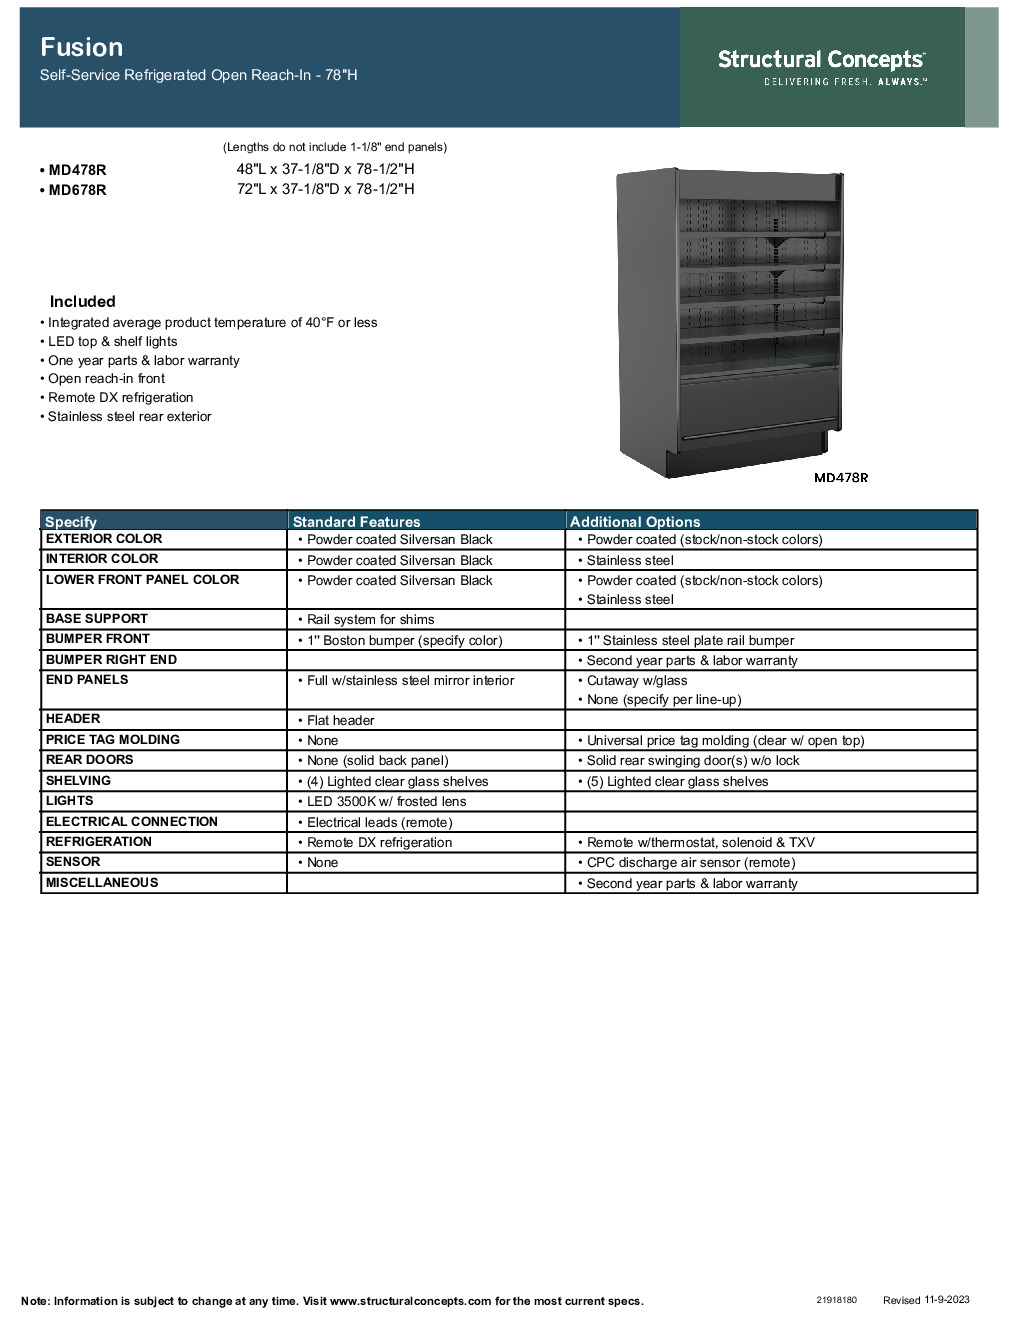 Structural Concepts MD478R Self-Serve Refrigerated Display Case